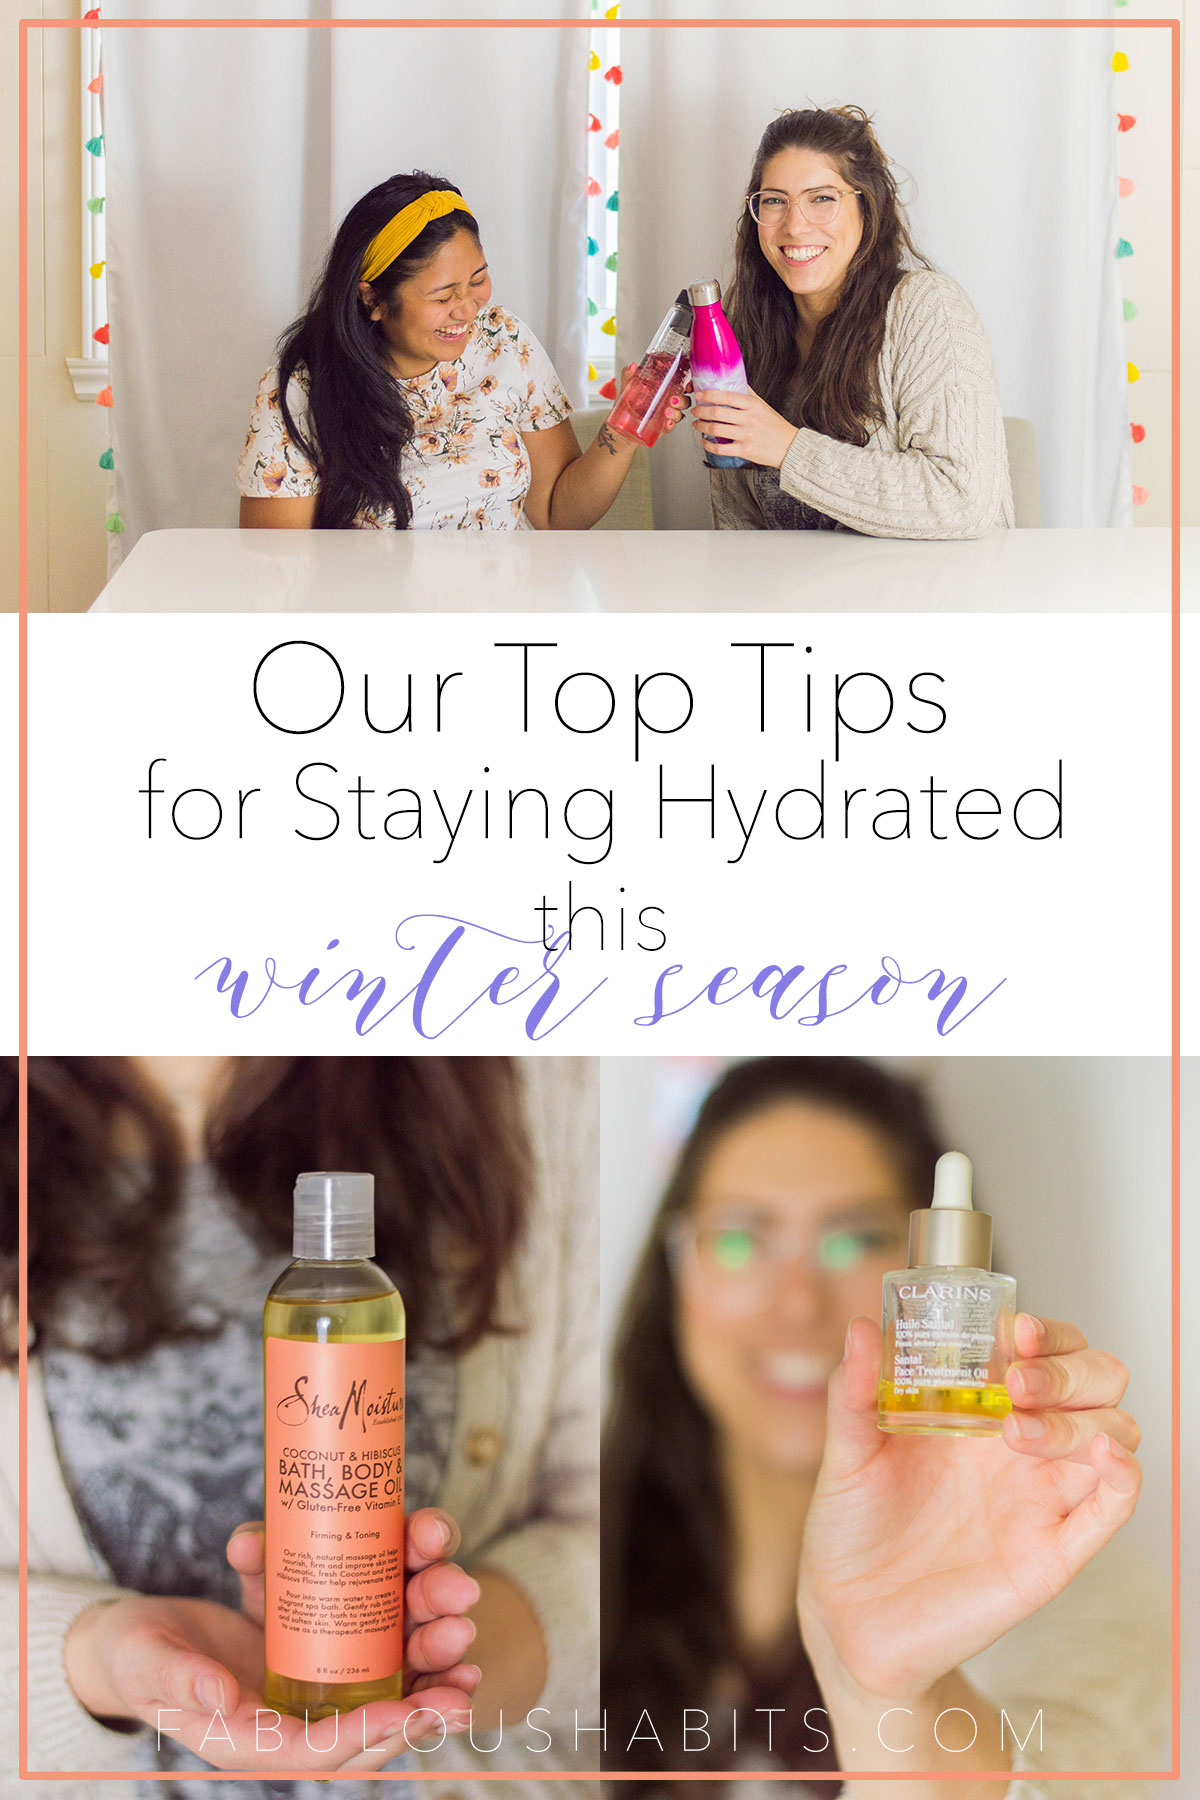 The winter season can feel like a long one. Read up on our foolproof tips on how to stay hydrated all season long. #staydrated